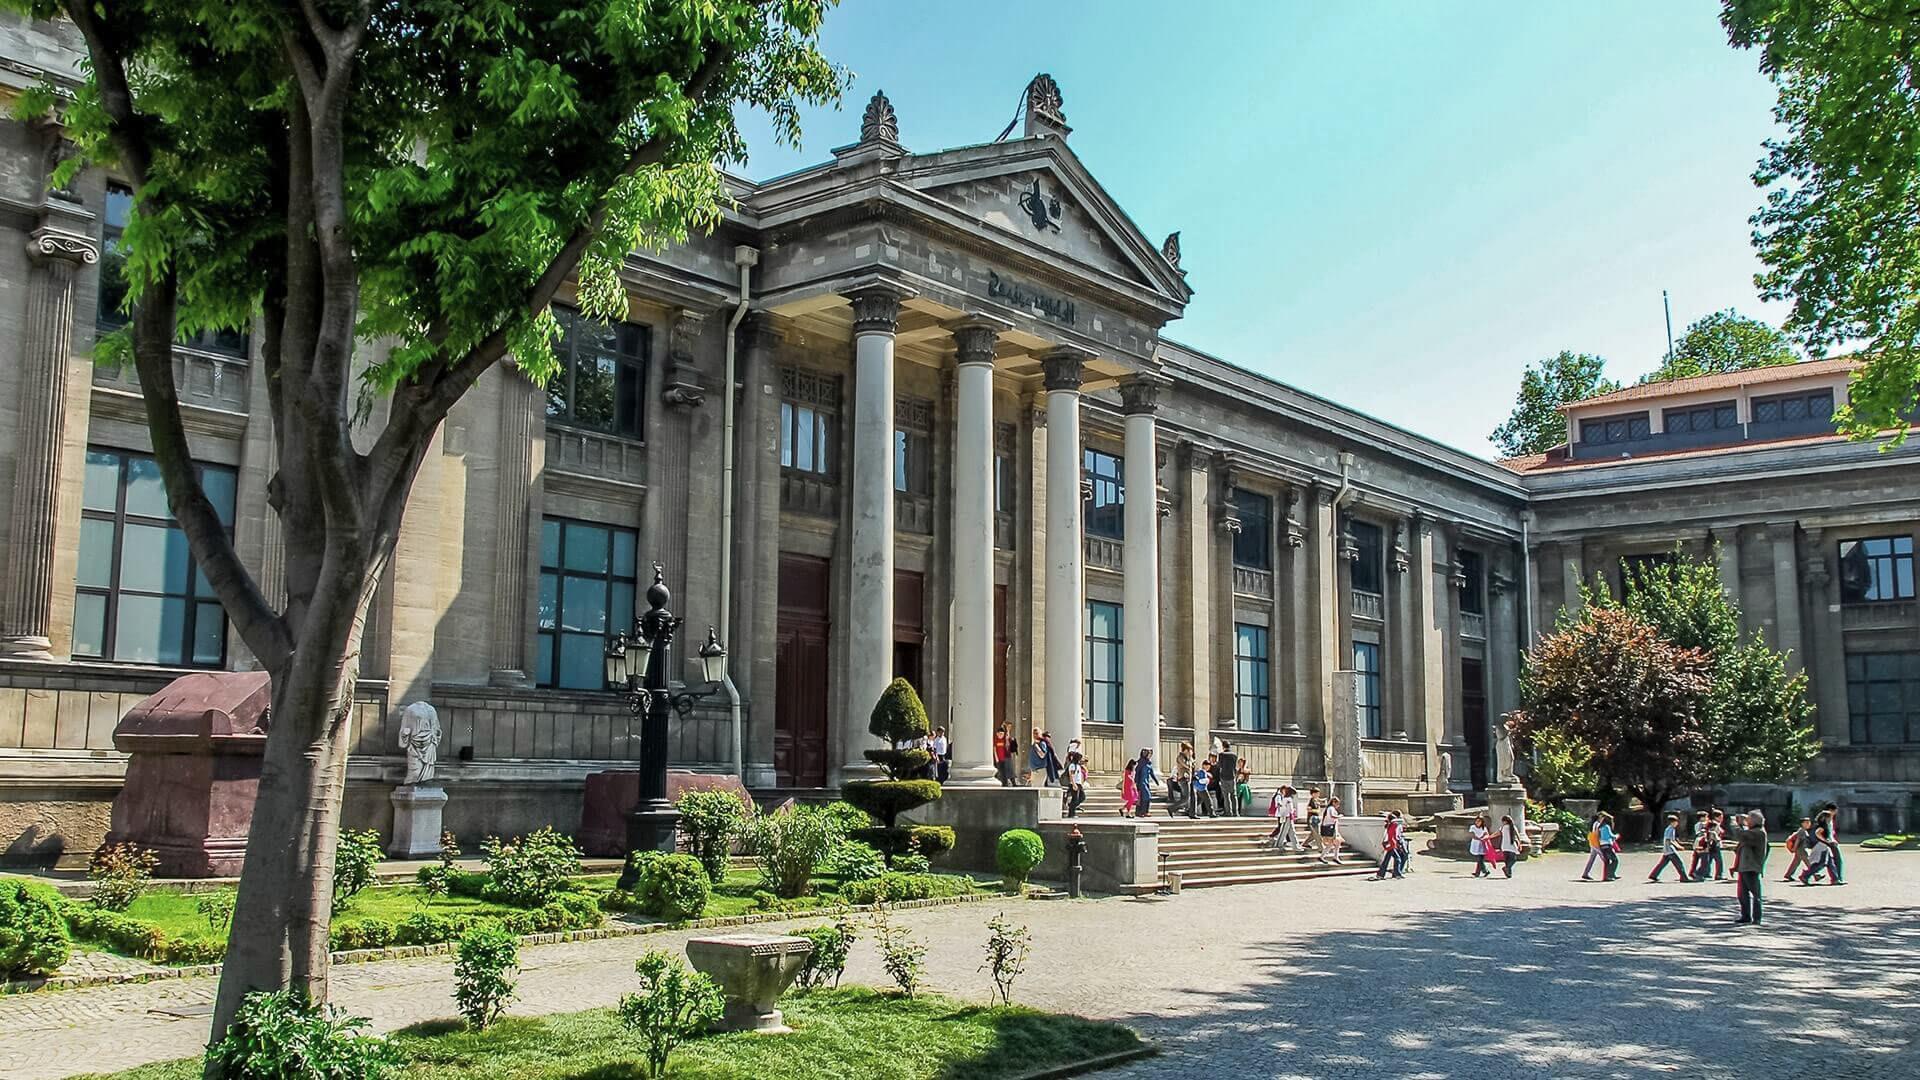 Plan your visit to the famous Istanbul Archaeological Museums